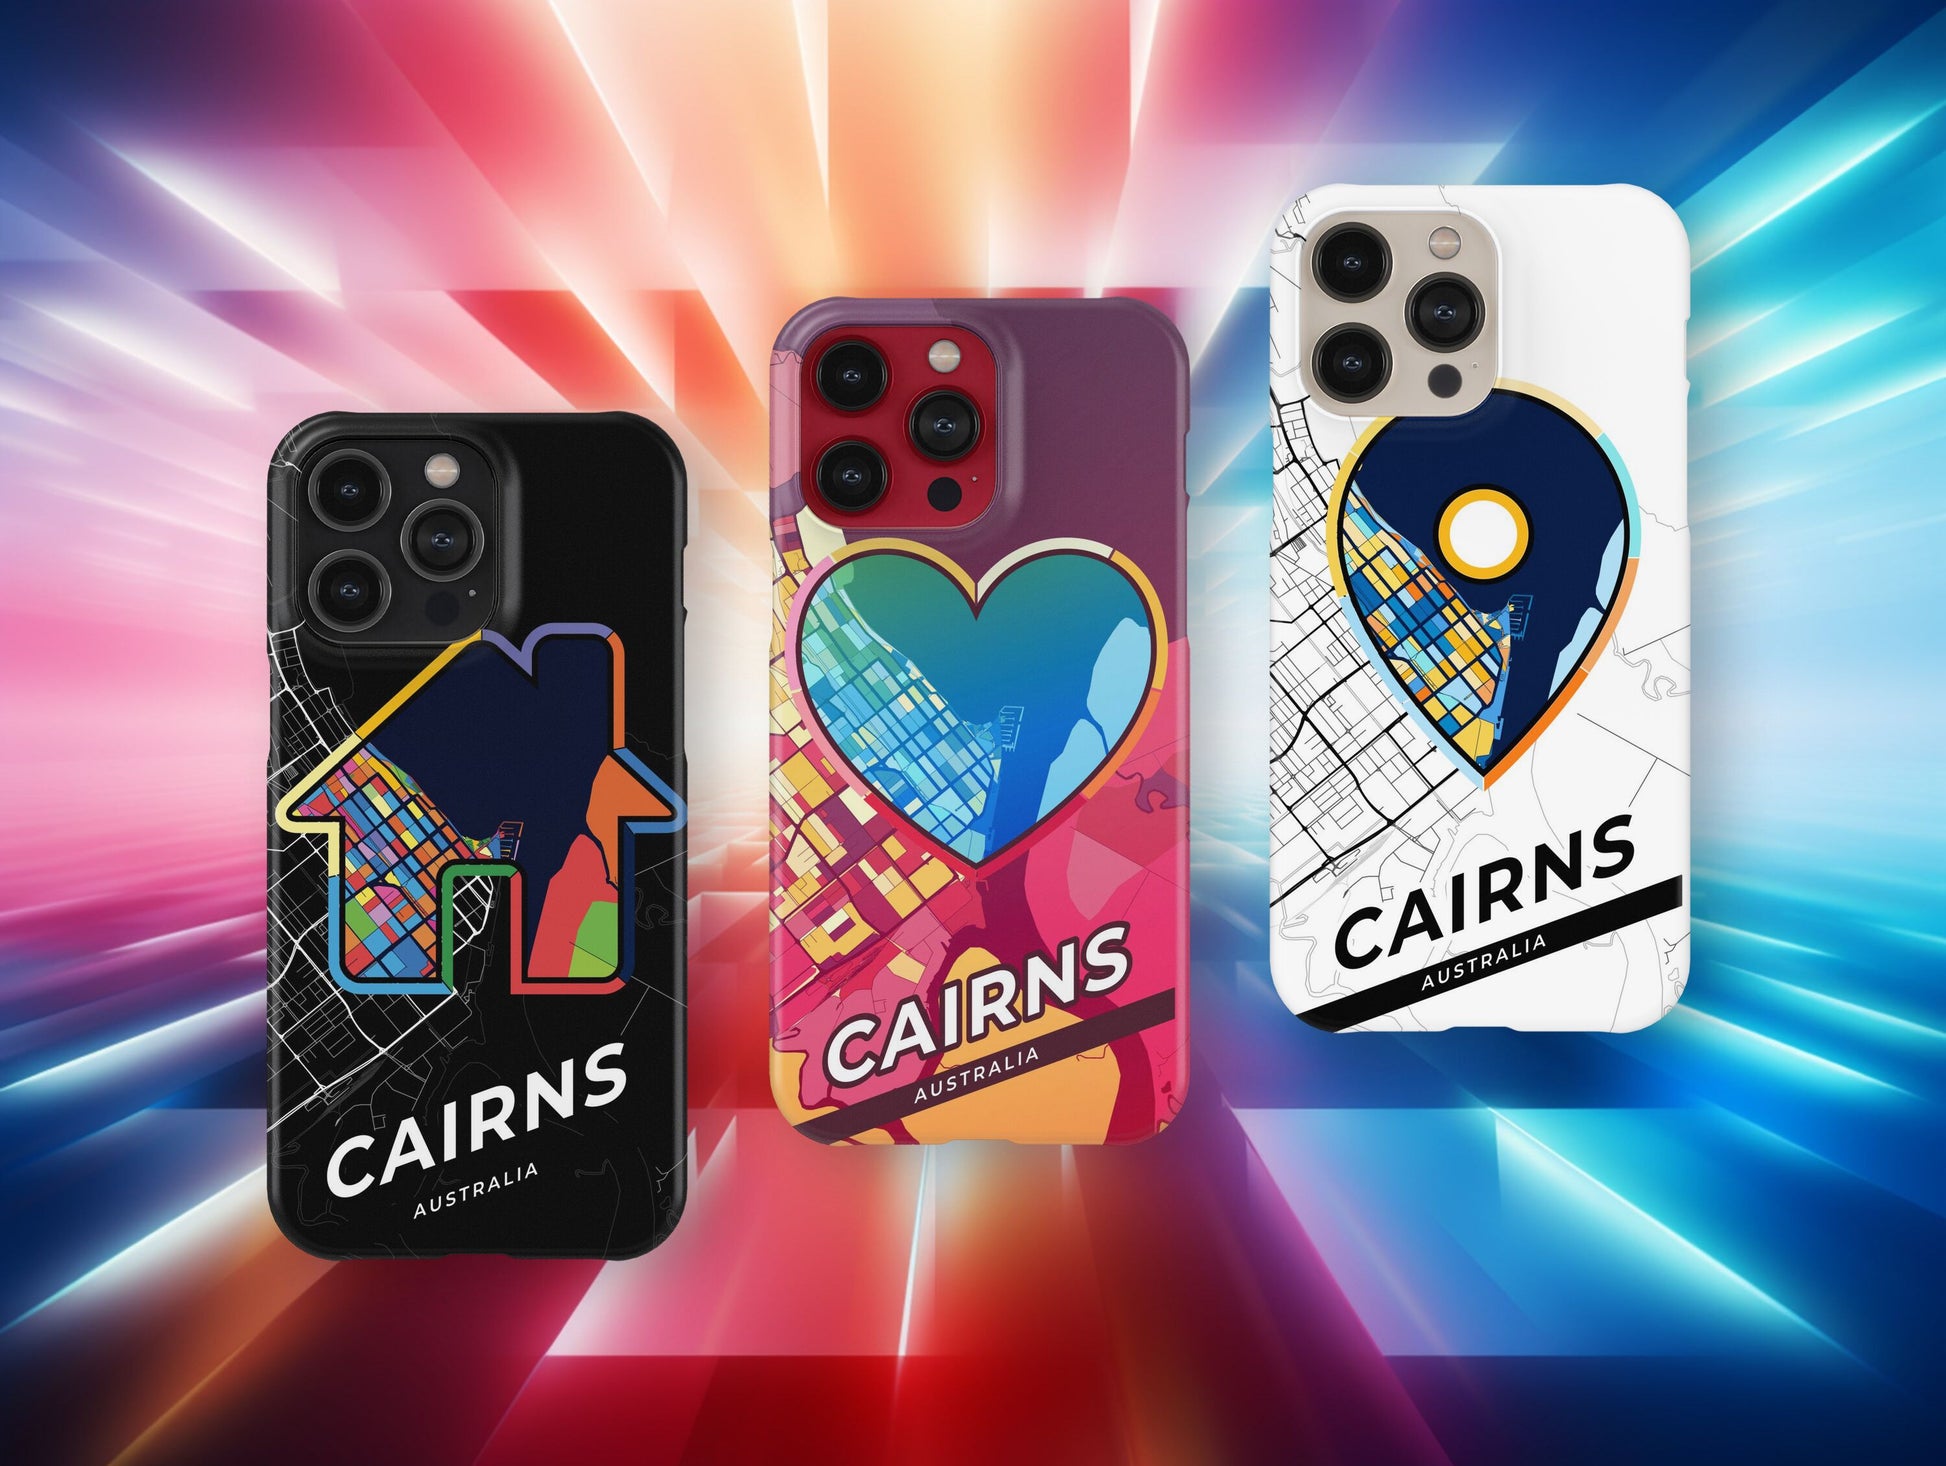 Cairns Australia slim phone case with colorful icon. Birthday, wedding or housewarming gift. Couple match cases.